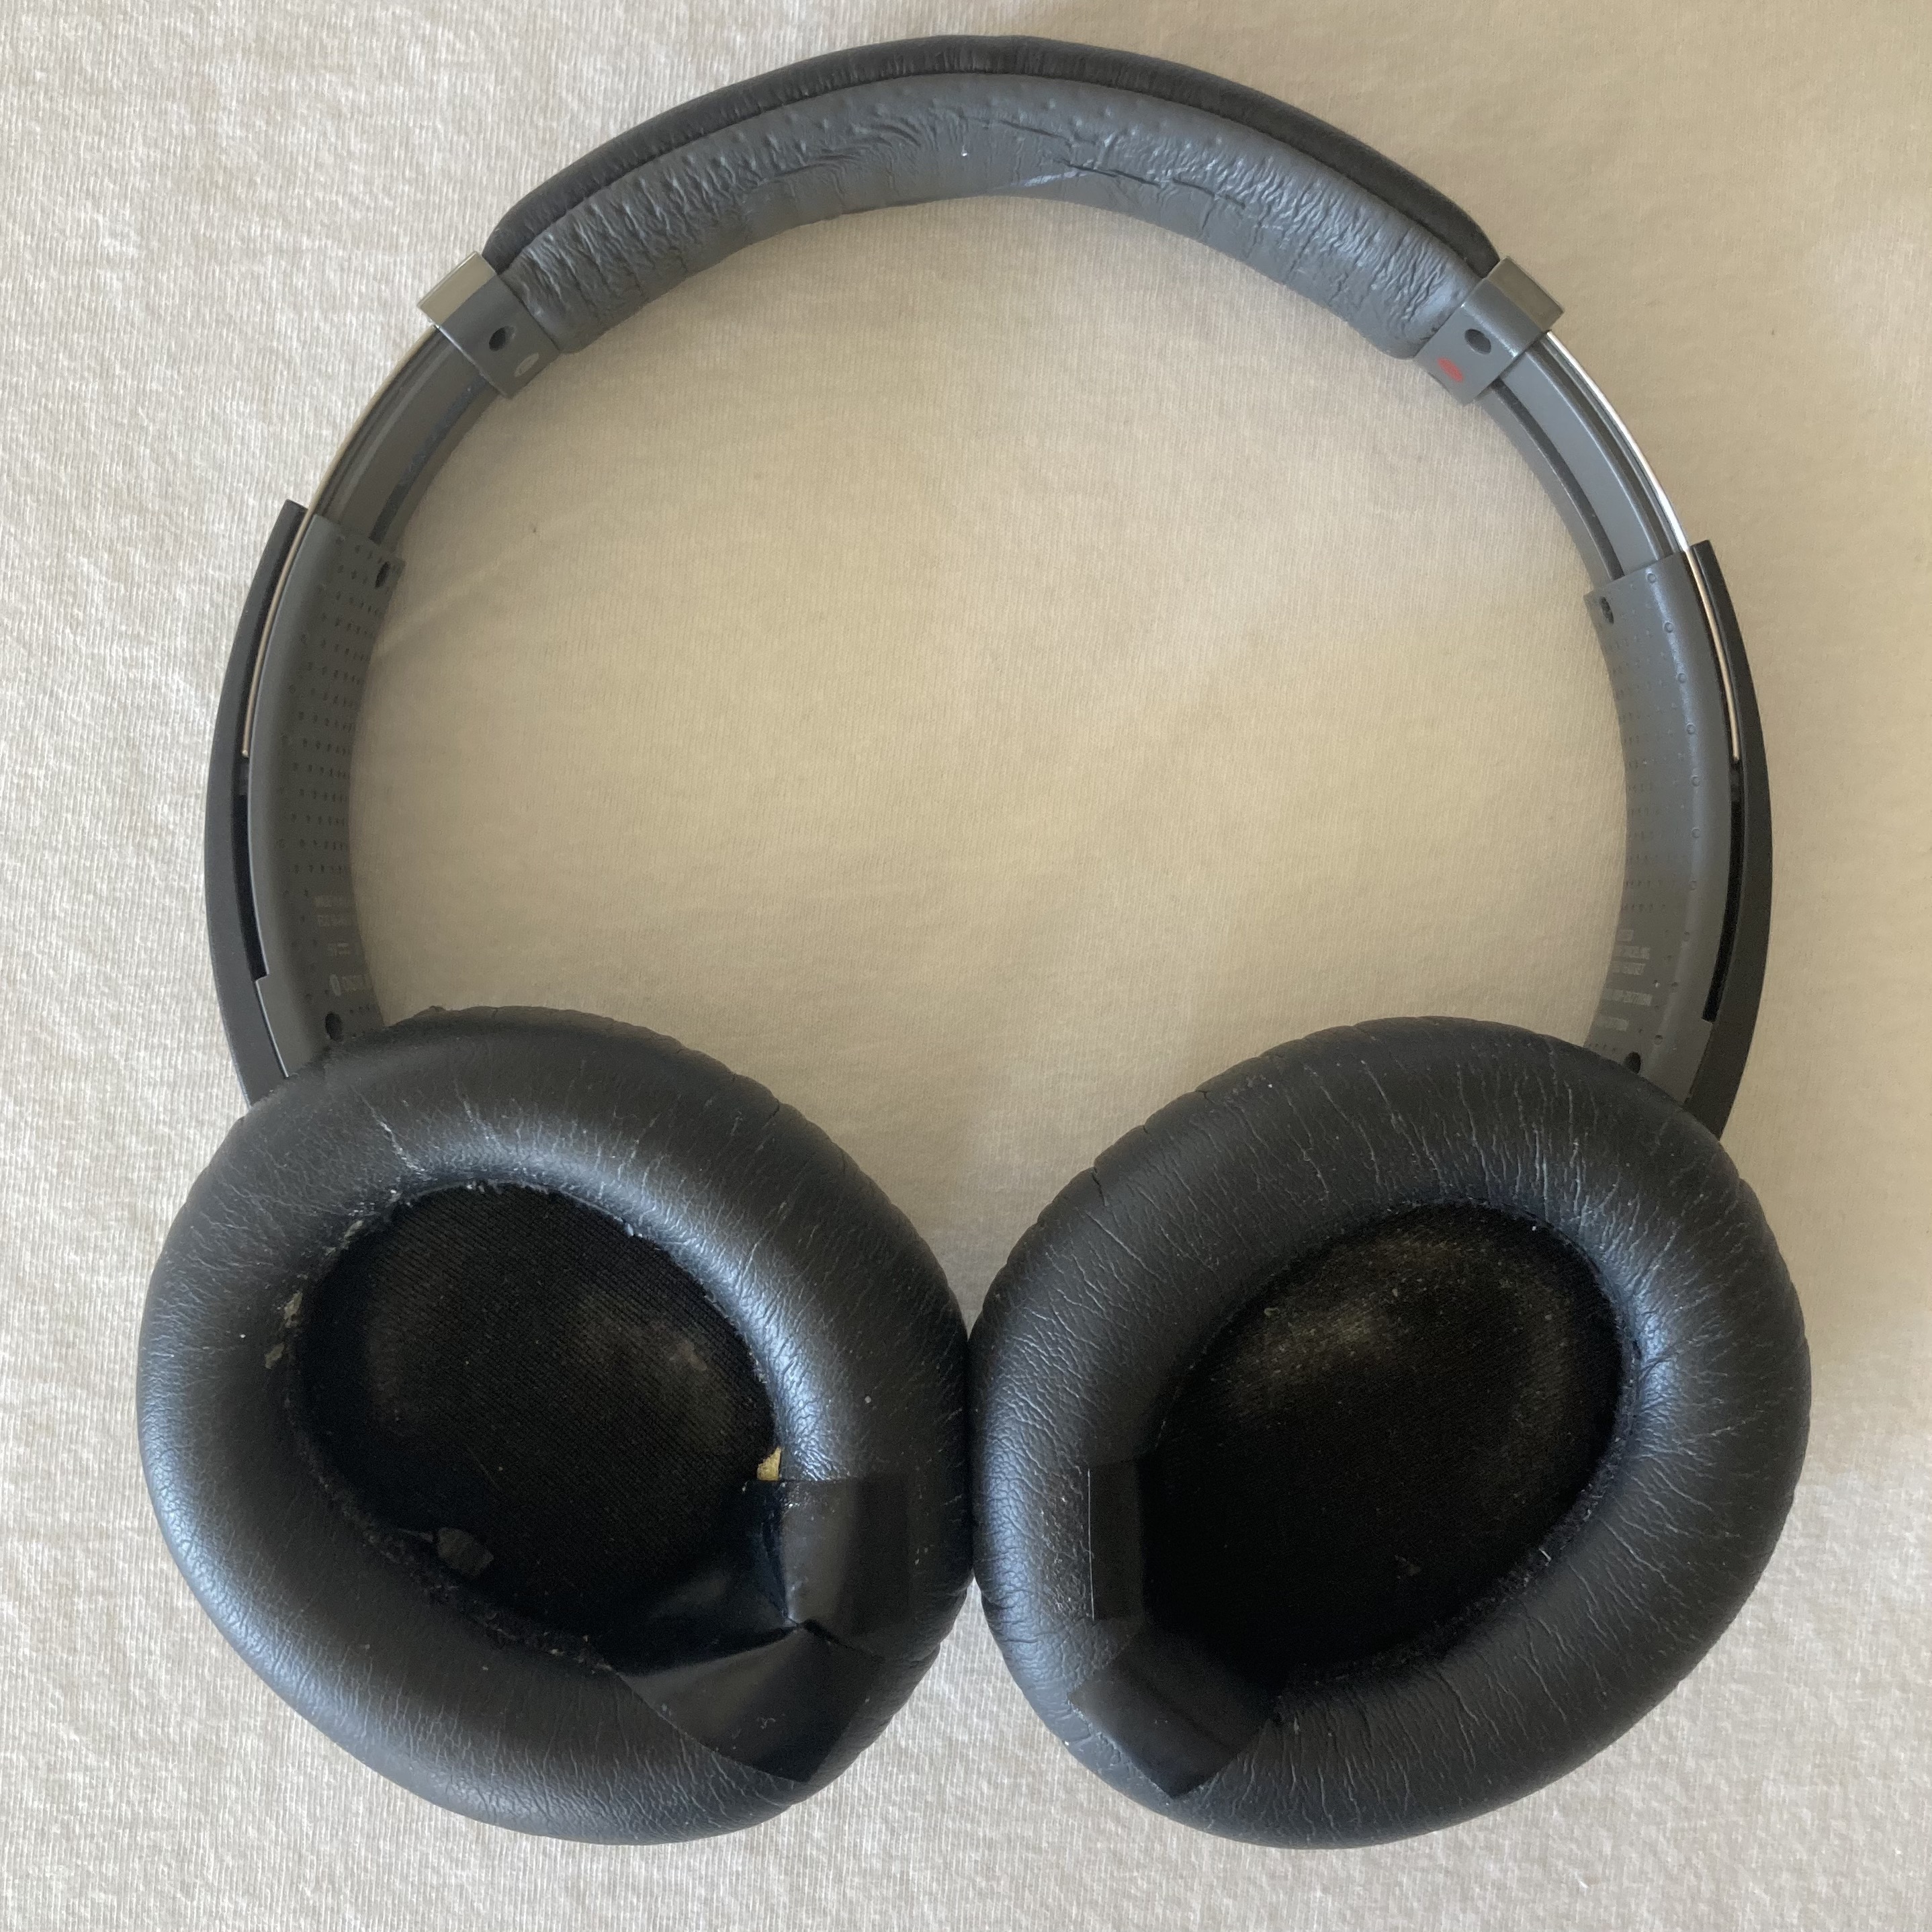 The stock earpads have each developed a hole along the bottom curve, exposing the foam inside. Each hole is vainly patched over with poorly-sticking electrical tape.